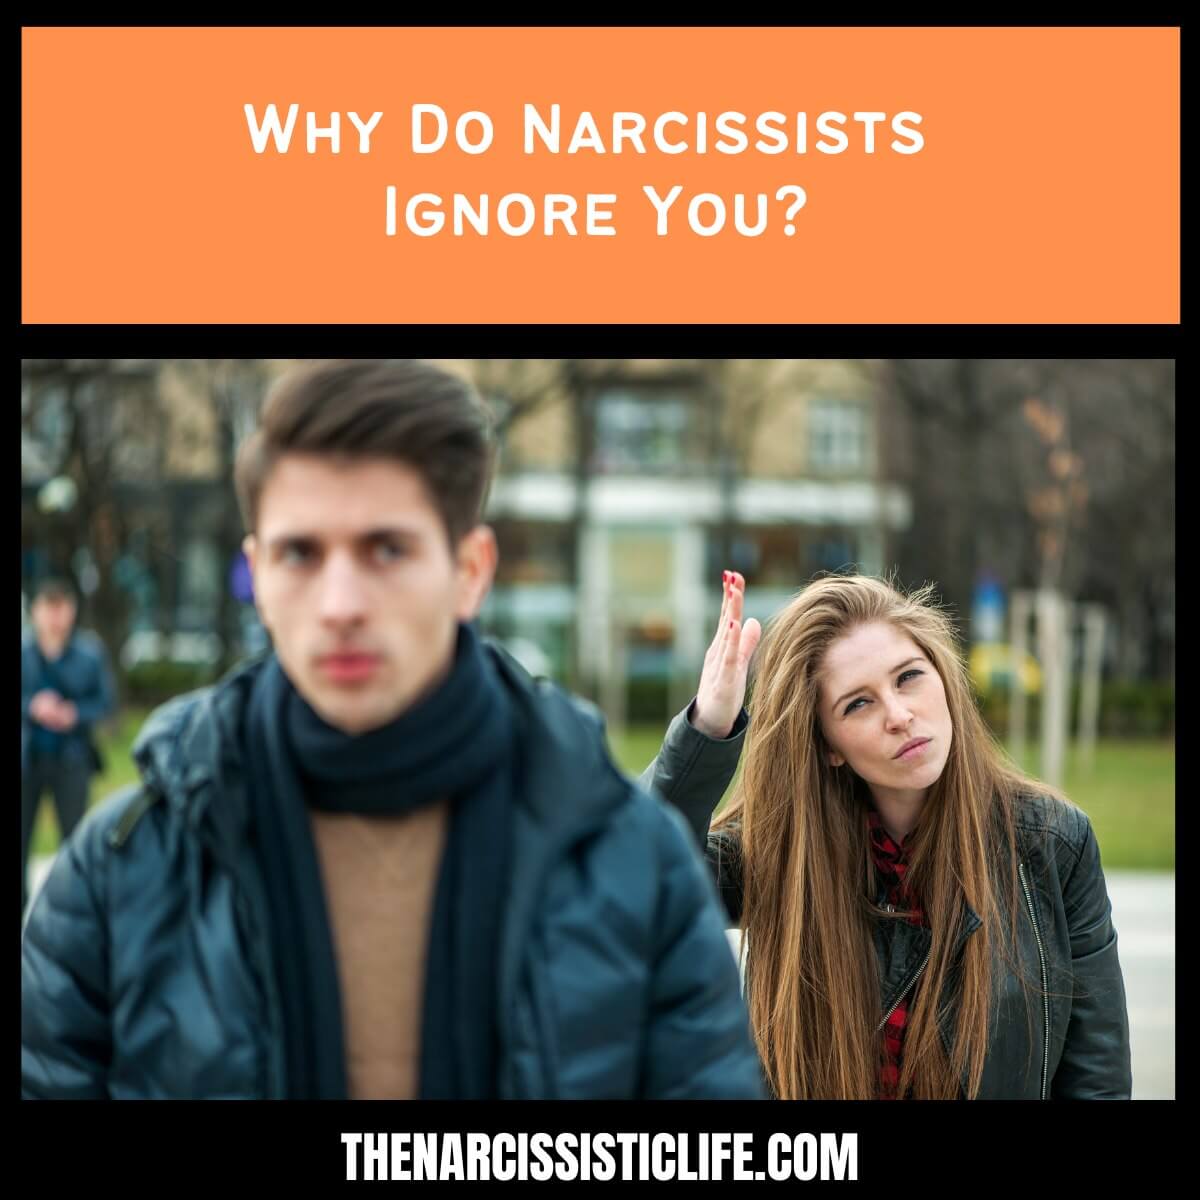 Why Do Narcissists Ignore You